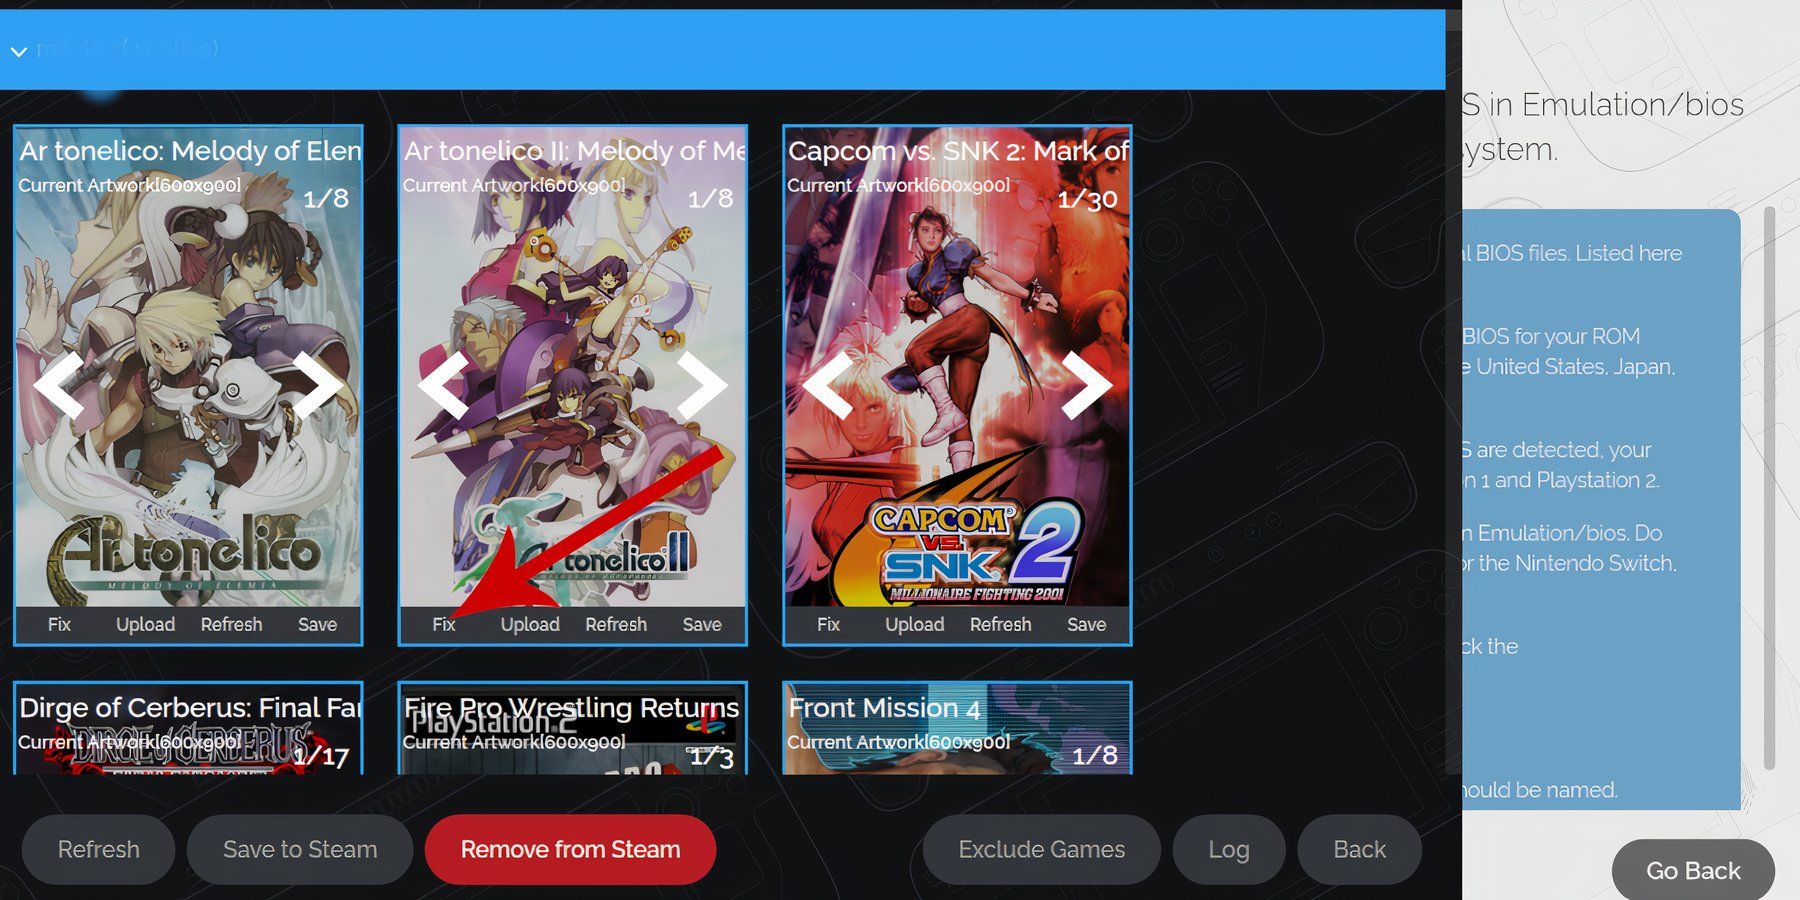 Click Fix to change or upload a cover image on the Steam Rom Manager